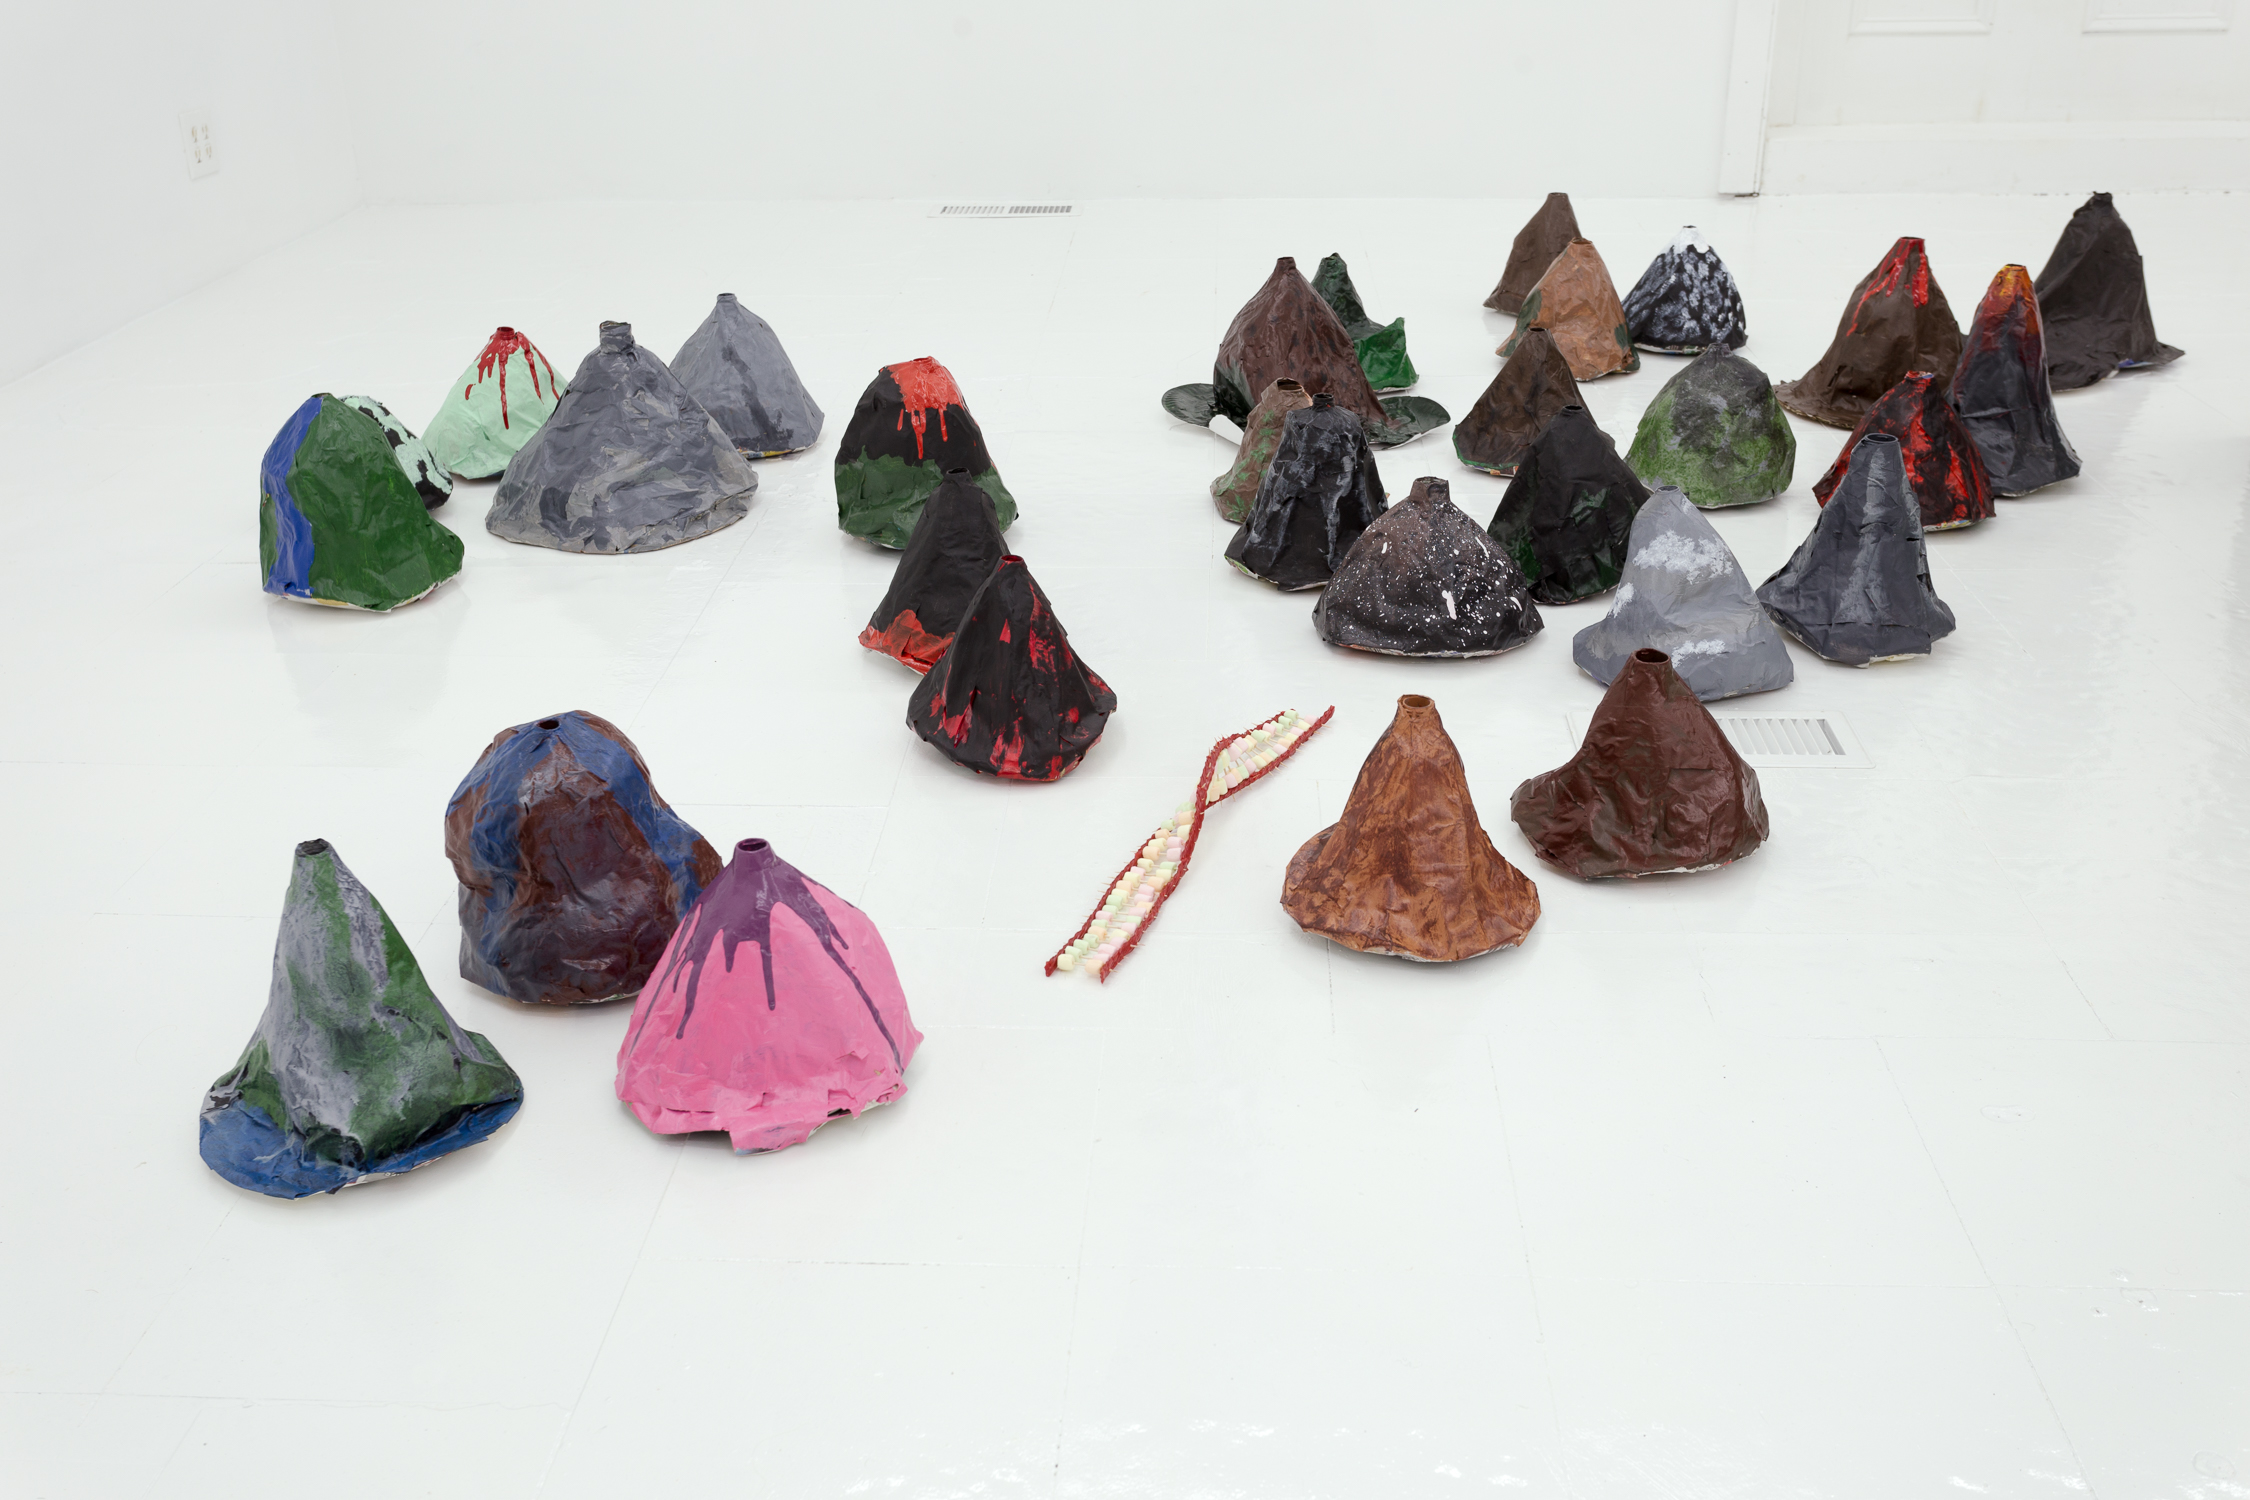 Grouping of papier mache volcanoes, with a twisted candy and toothpick sculpture in the center